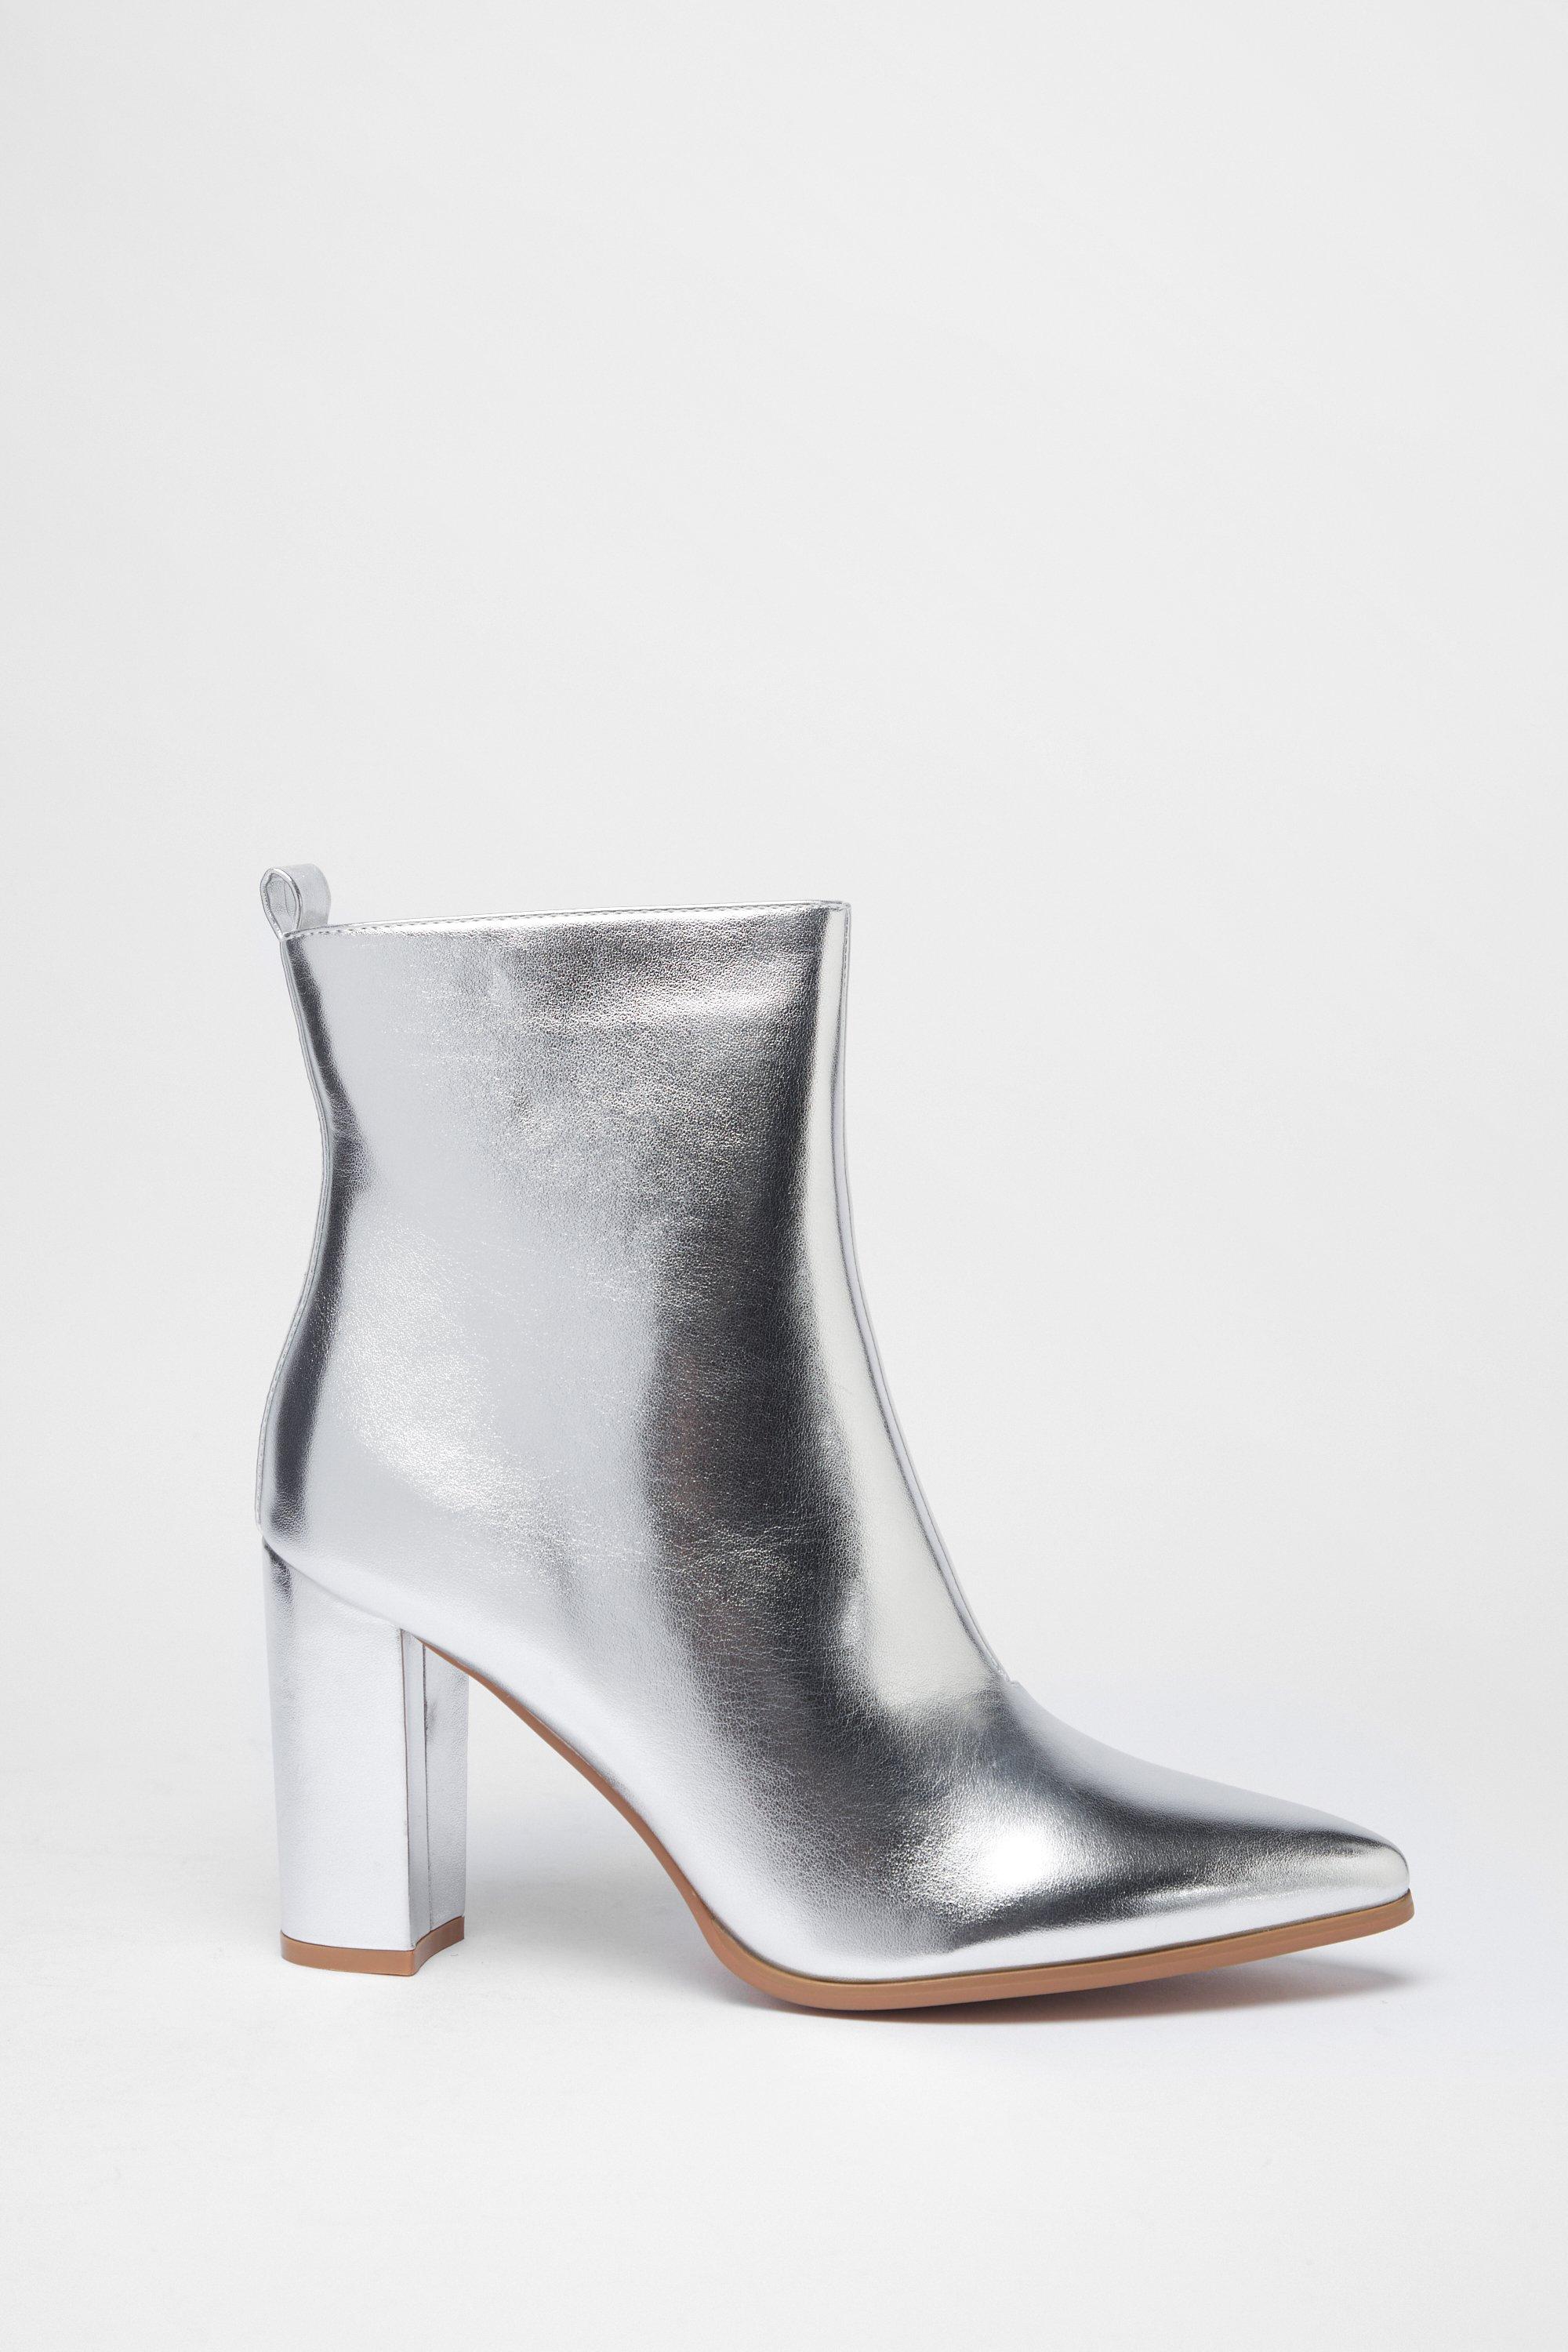 Womens Block Heel Ponted Toe Ankle Boot - silver